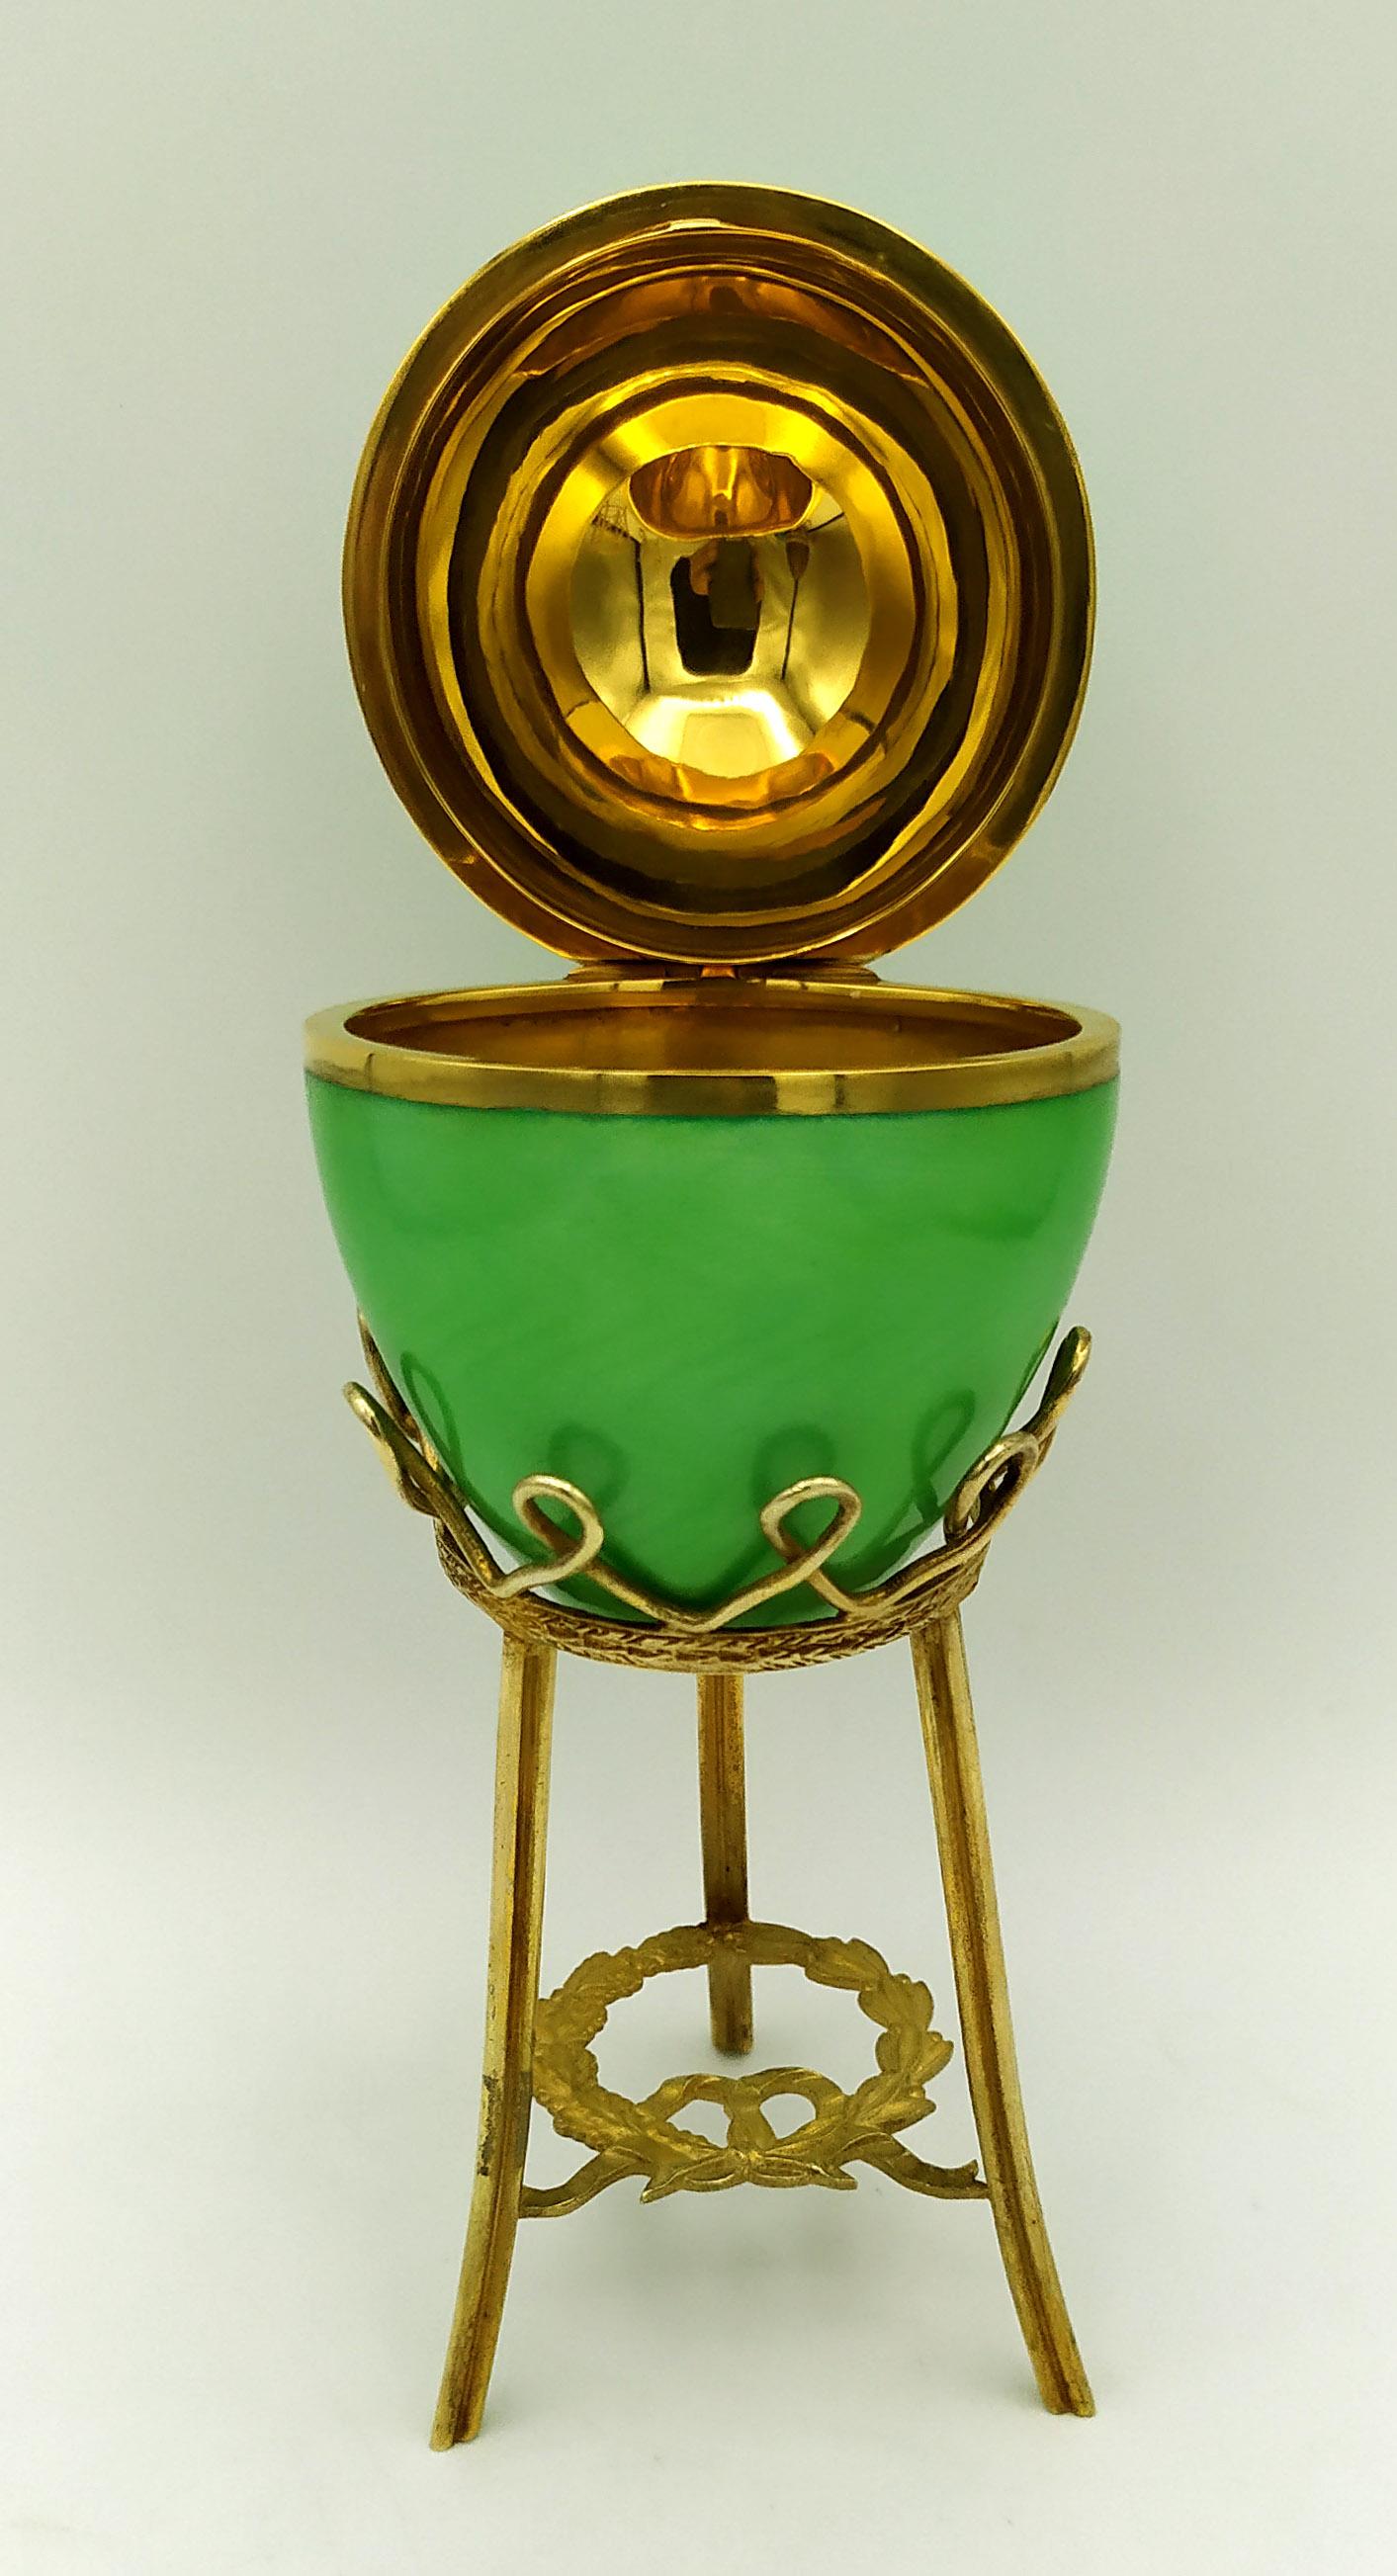 Gold Plate Egg Russian Empire style enamel with tall tripod Sterling Silver Salimbeni 